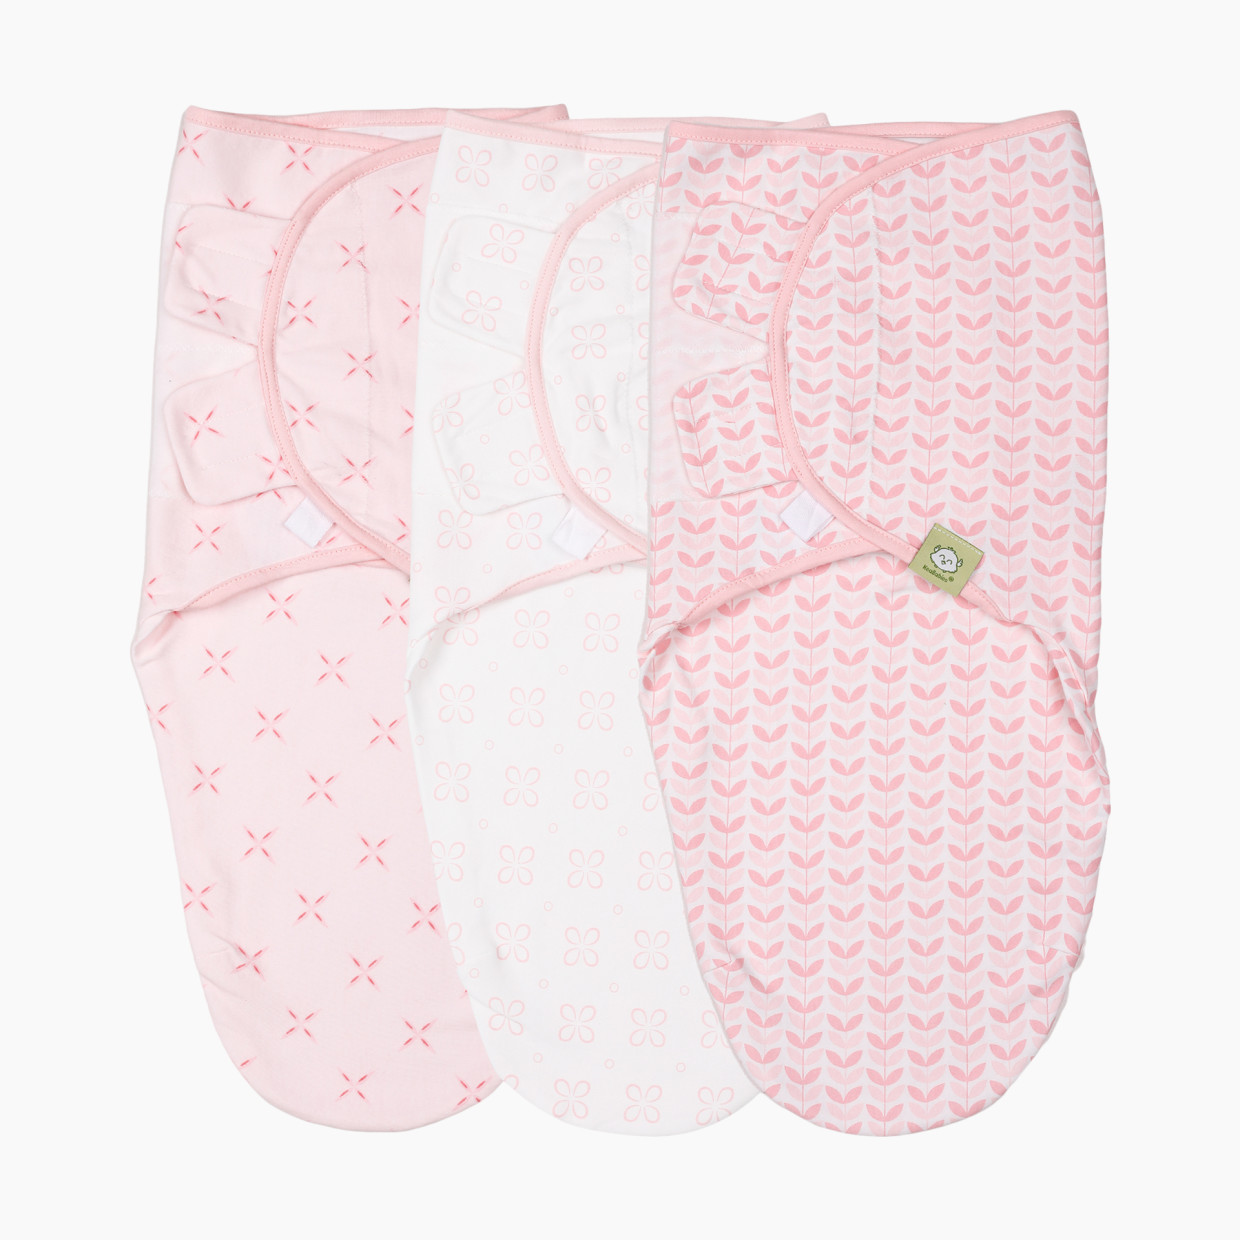 KeaBabies Soothe Swaddle Wraps (3 Pack) - Blossom, One Size, 3.